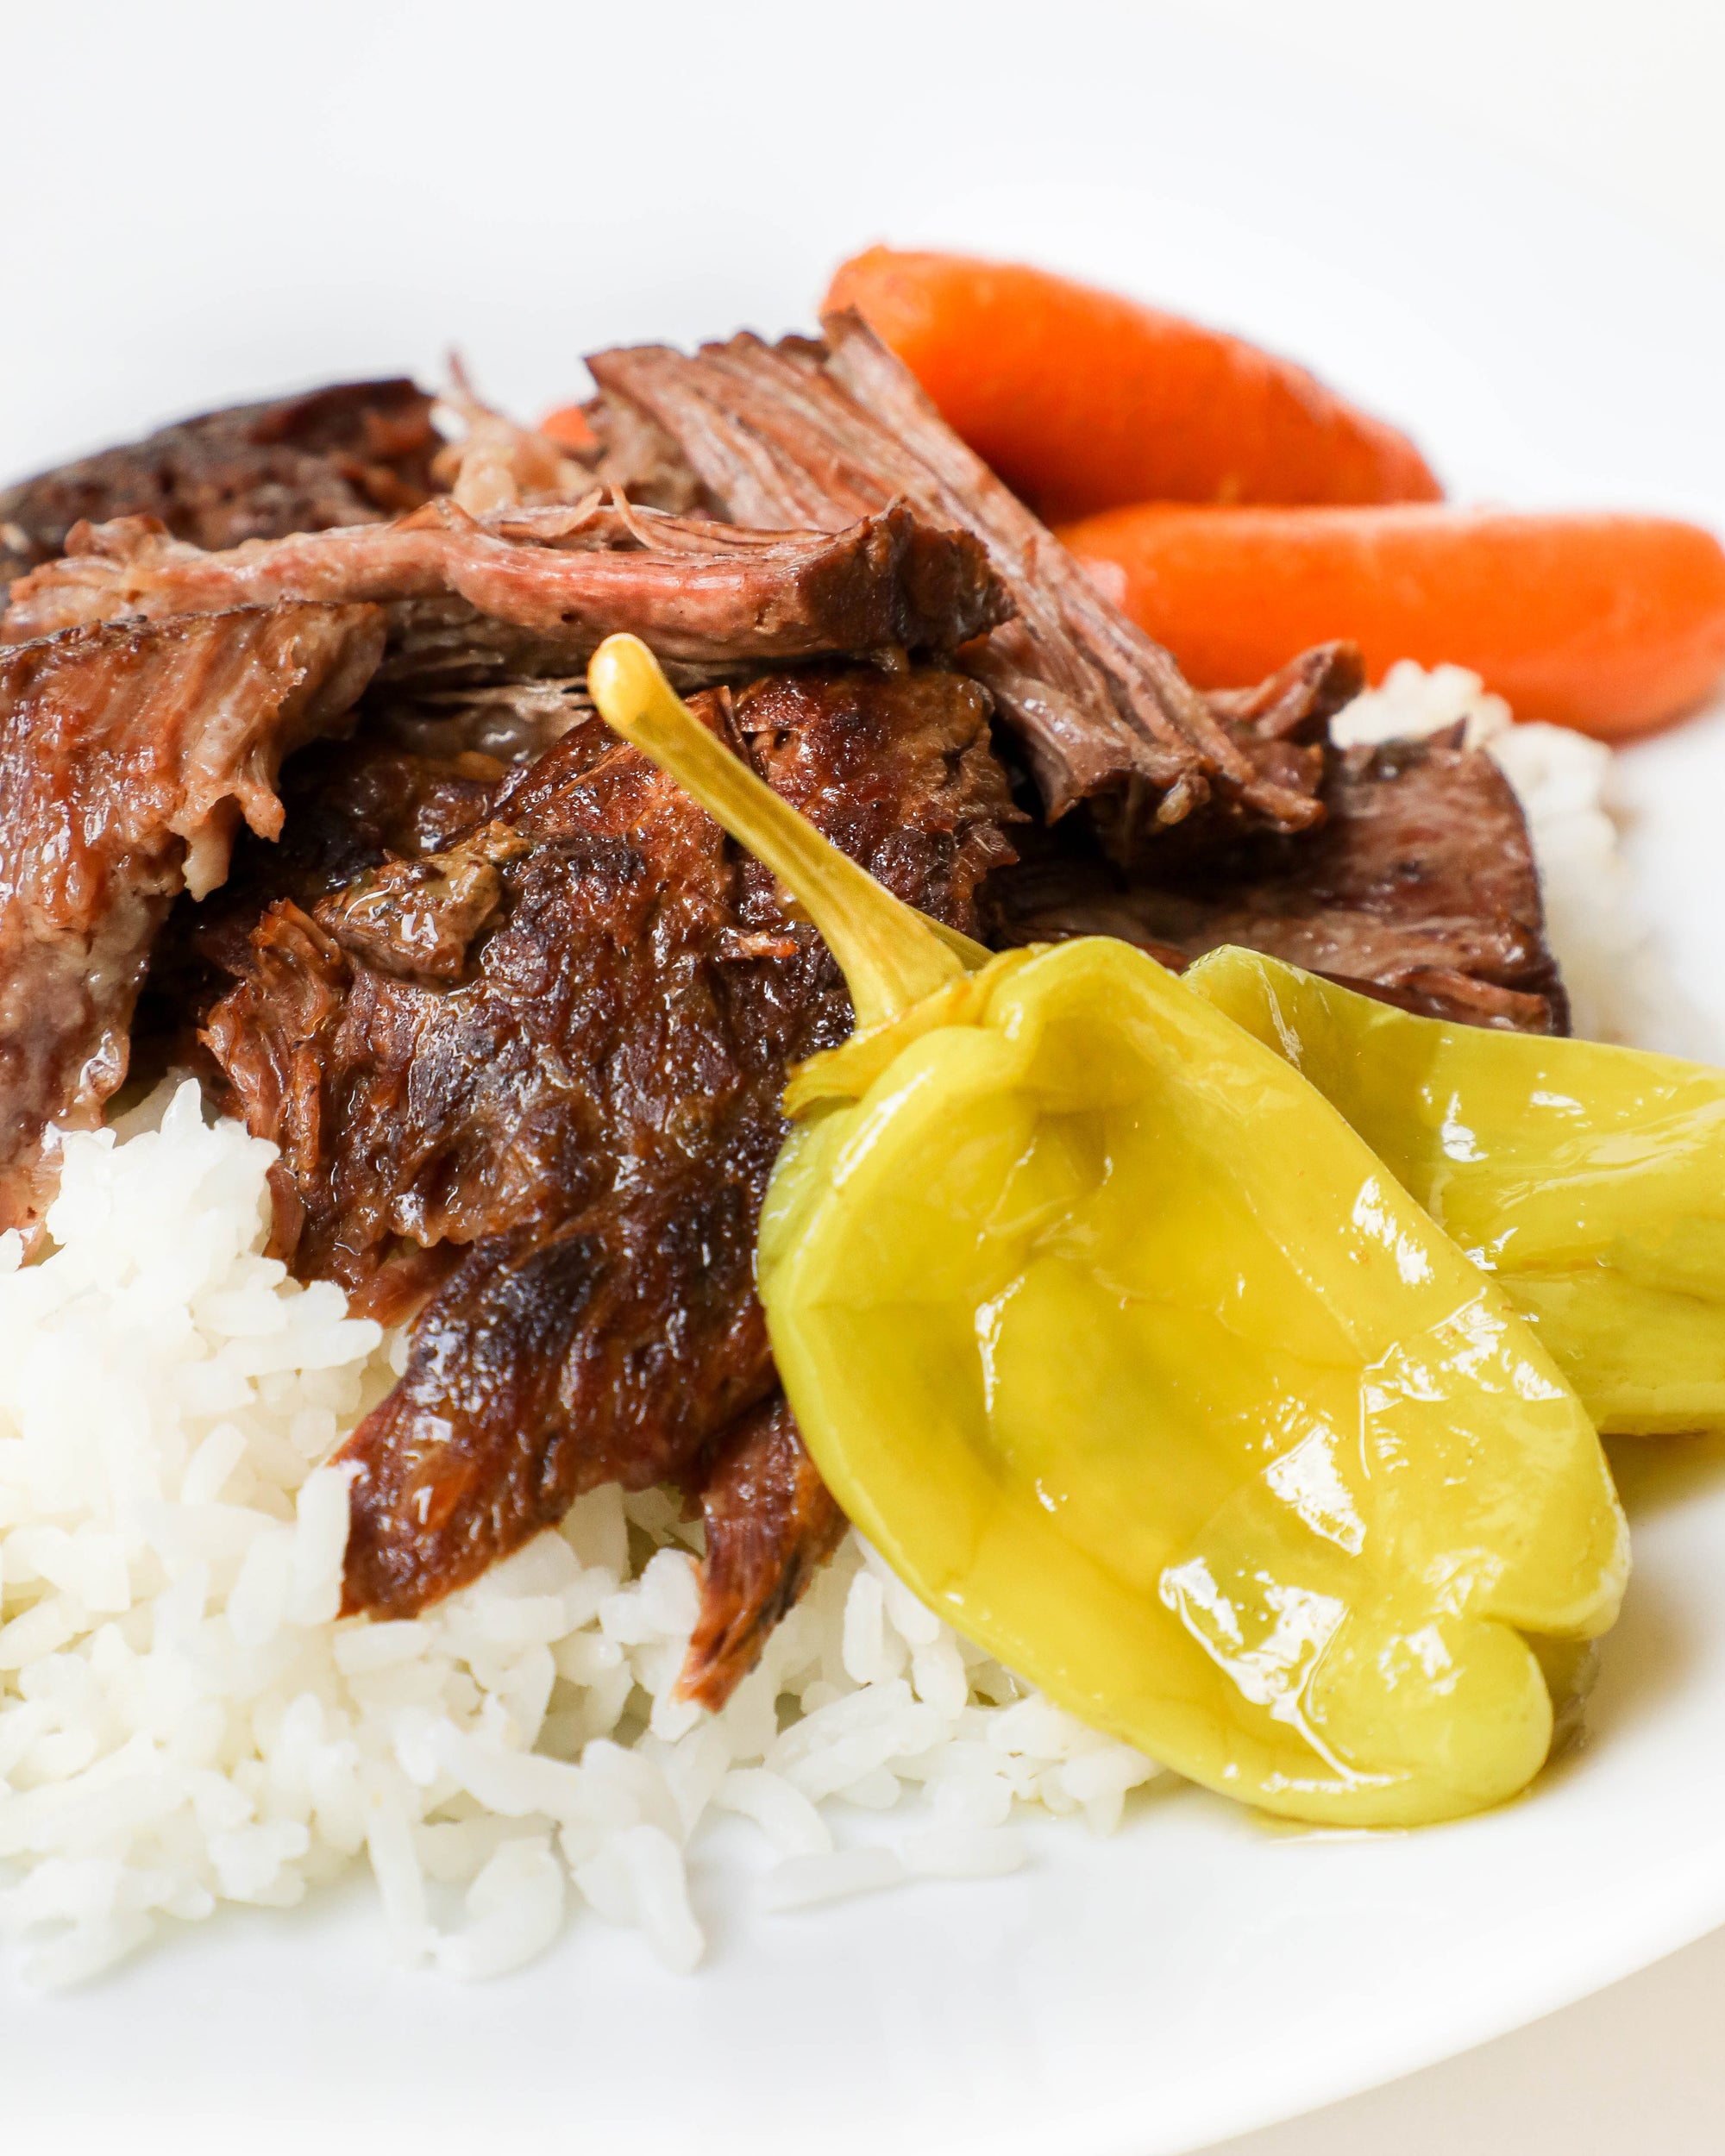 Brown Gravy Pot Roast recipe with carrots and peppers using the cajun spoon louisiana seasoning products